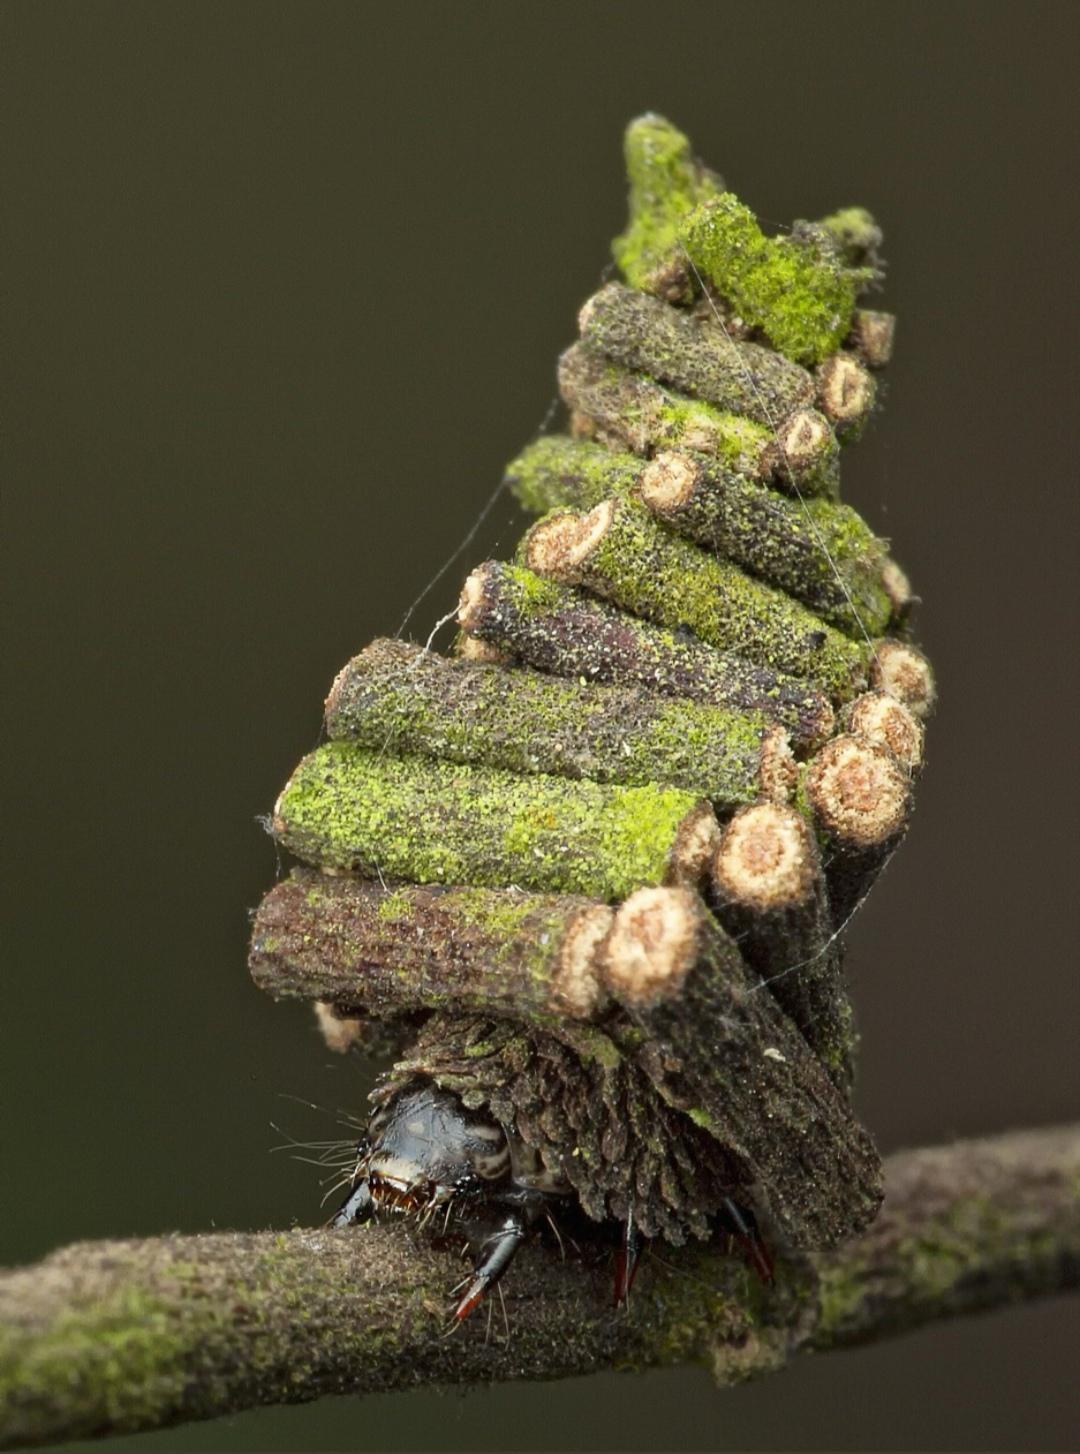 The Bagworm is the hobo of the caterpiller world...